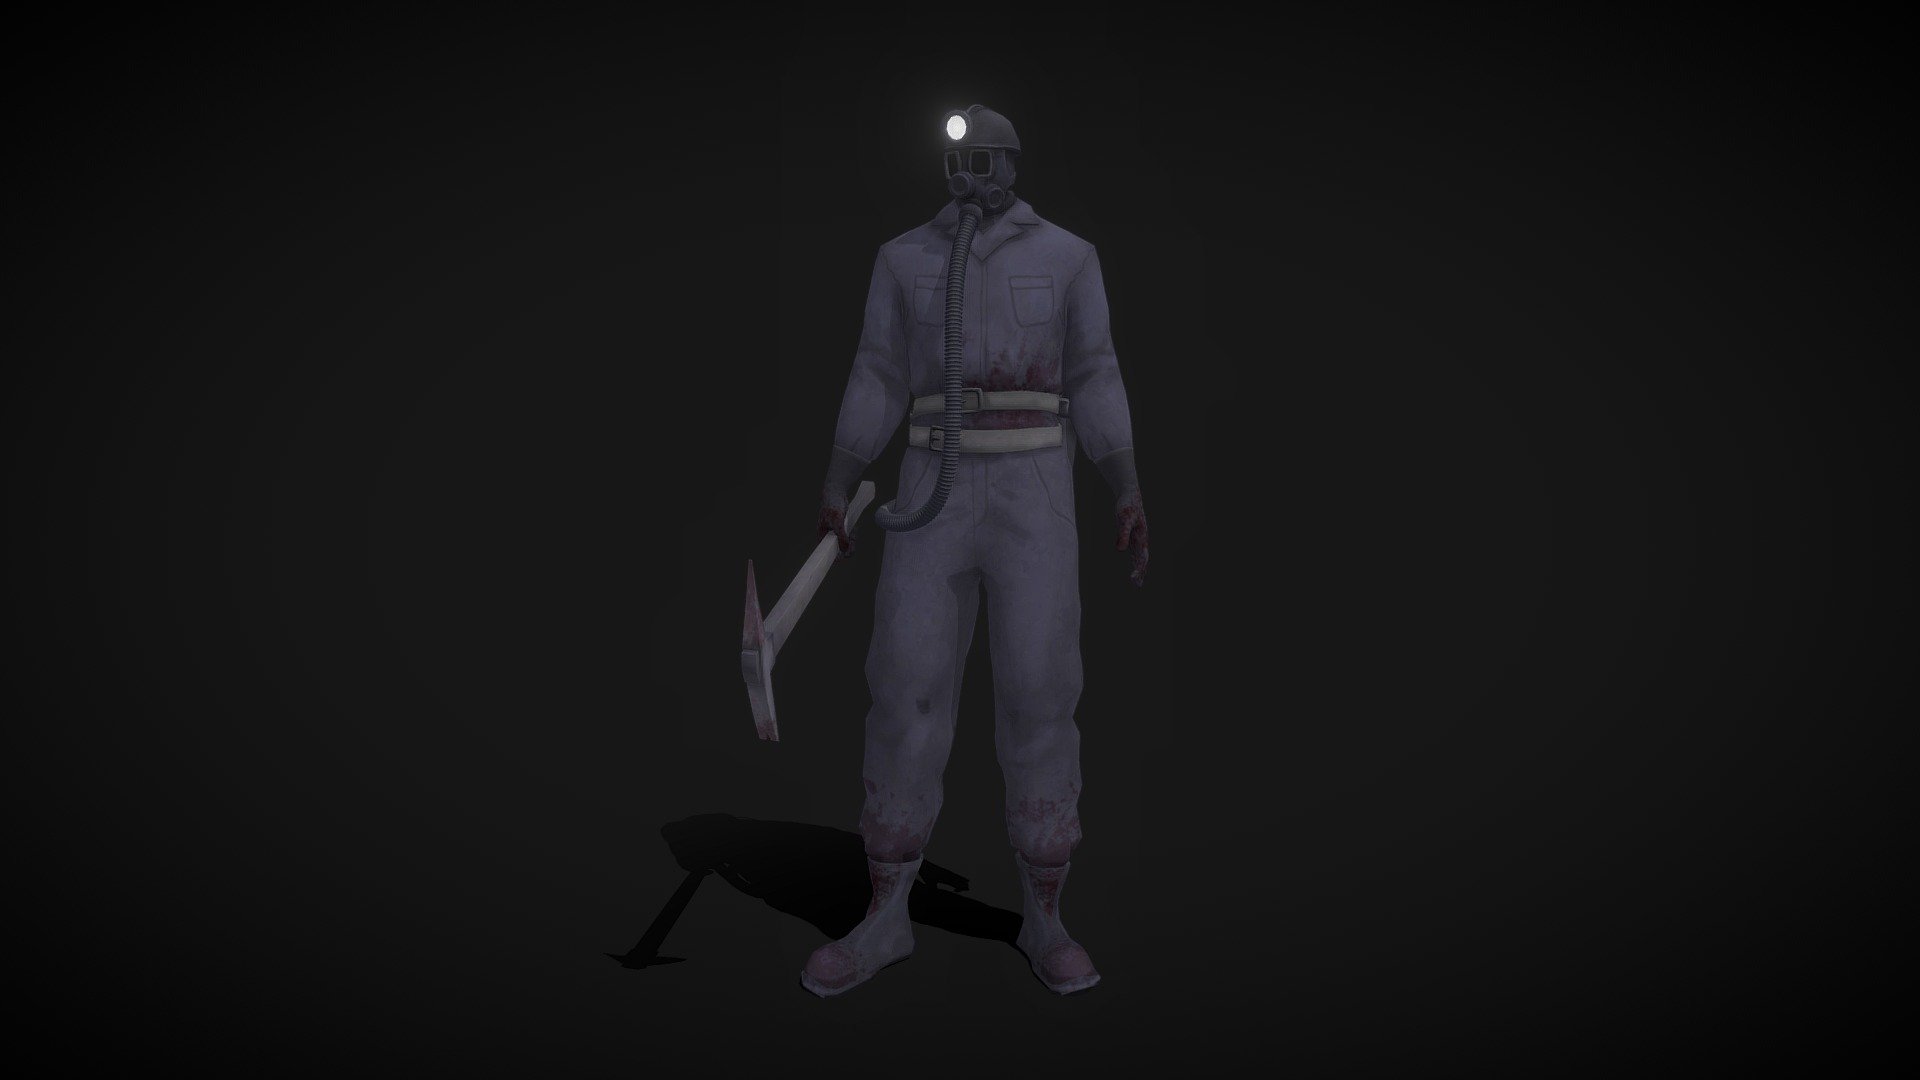 fanart of a character from My Bloody Valentine movie

based mostly on the 1981 design

reference: YT link - Harry Warden (fanart) - 3D model by Likopinina 3d model